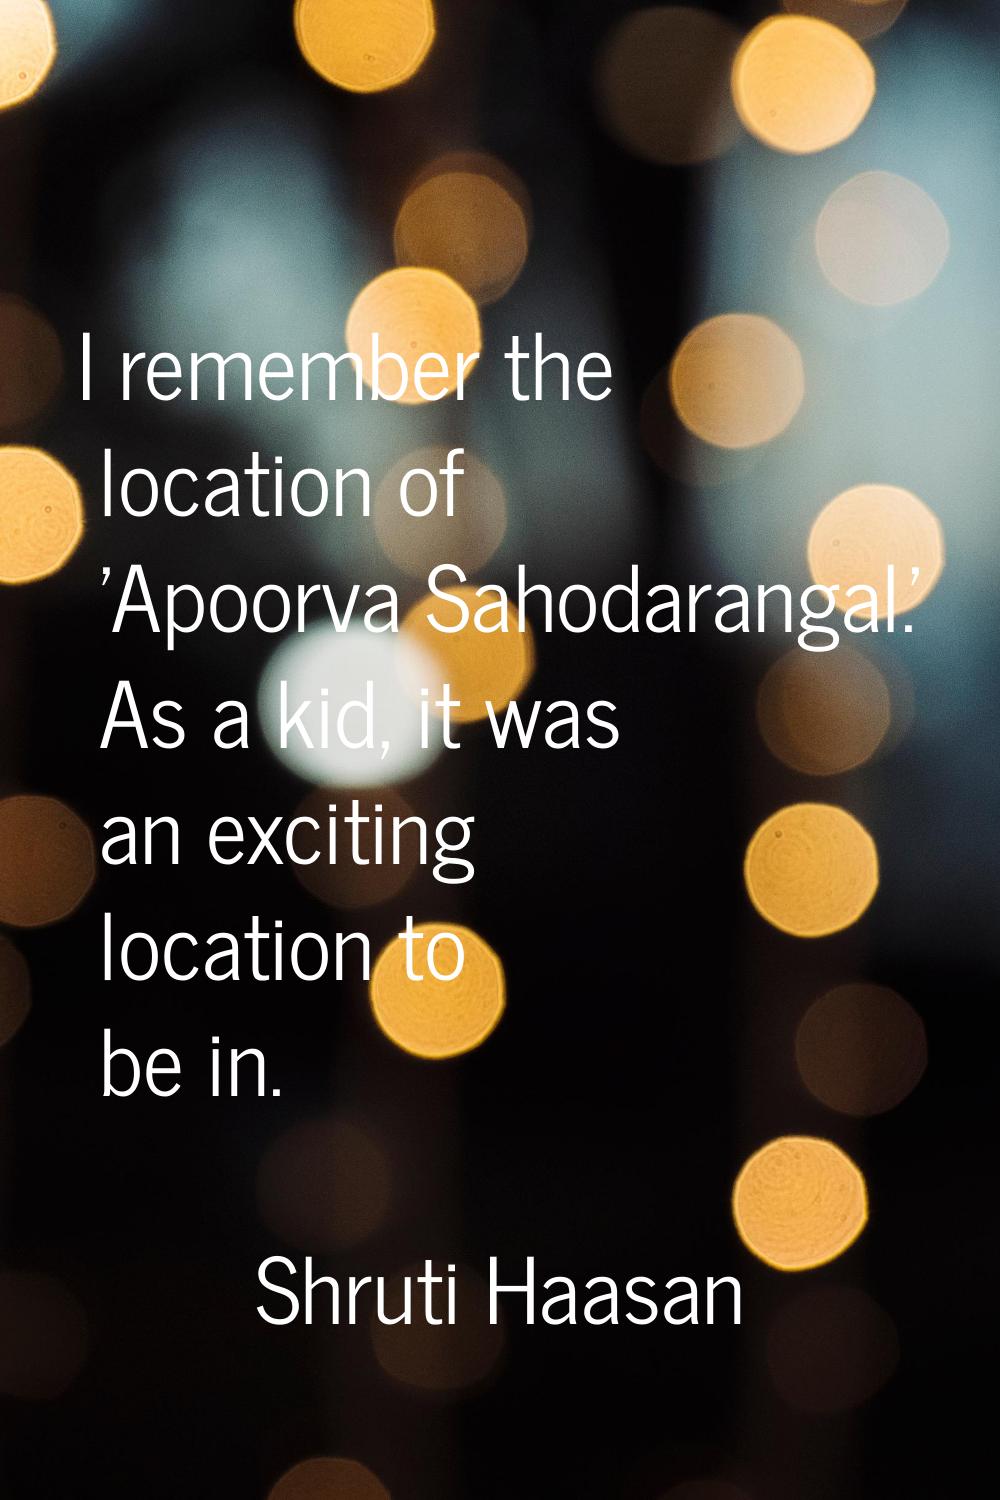 I remember the location of 'Apoorva Sahodarangal.' As a kid, it was an exciting location to be in.